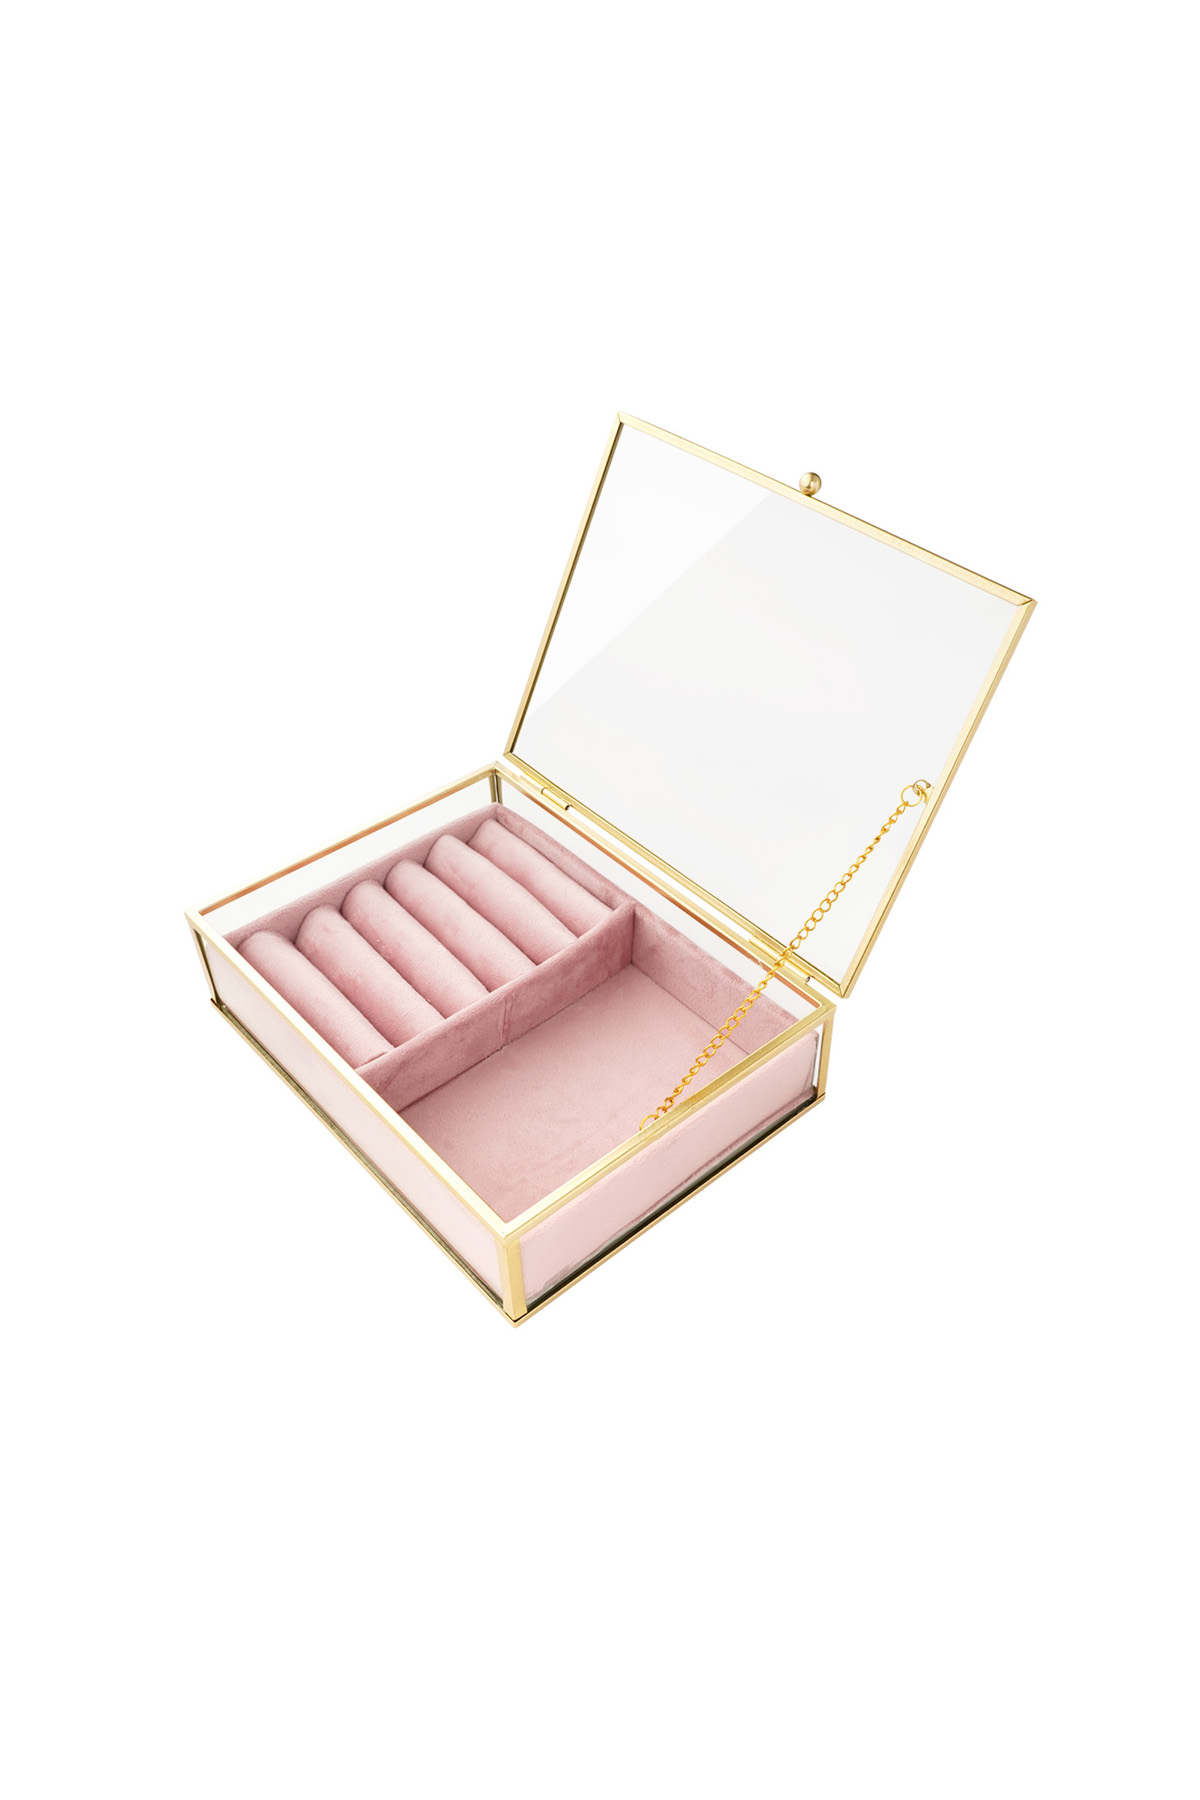 Glass two-compartment display - pink